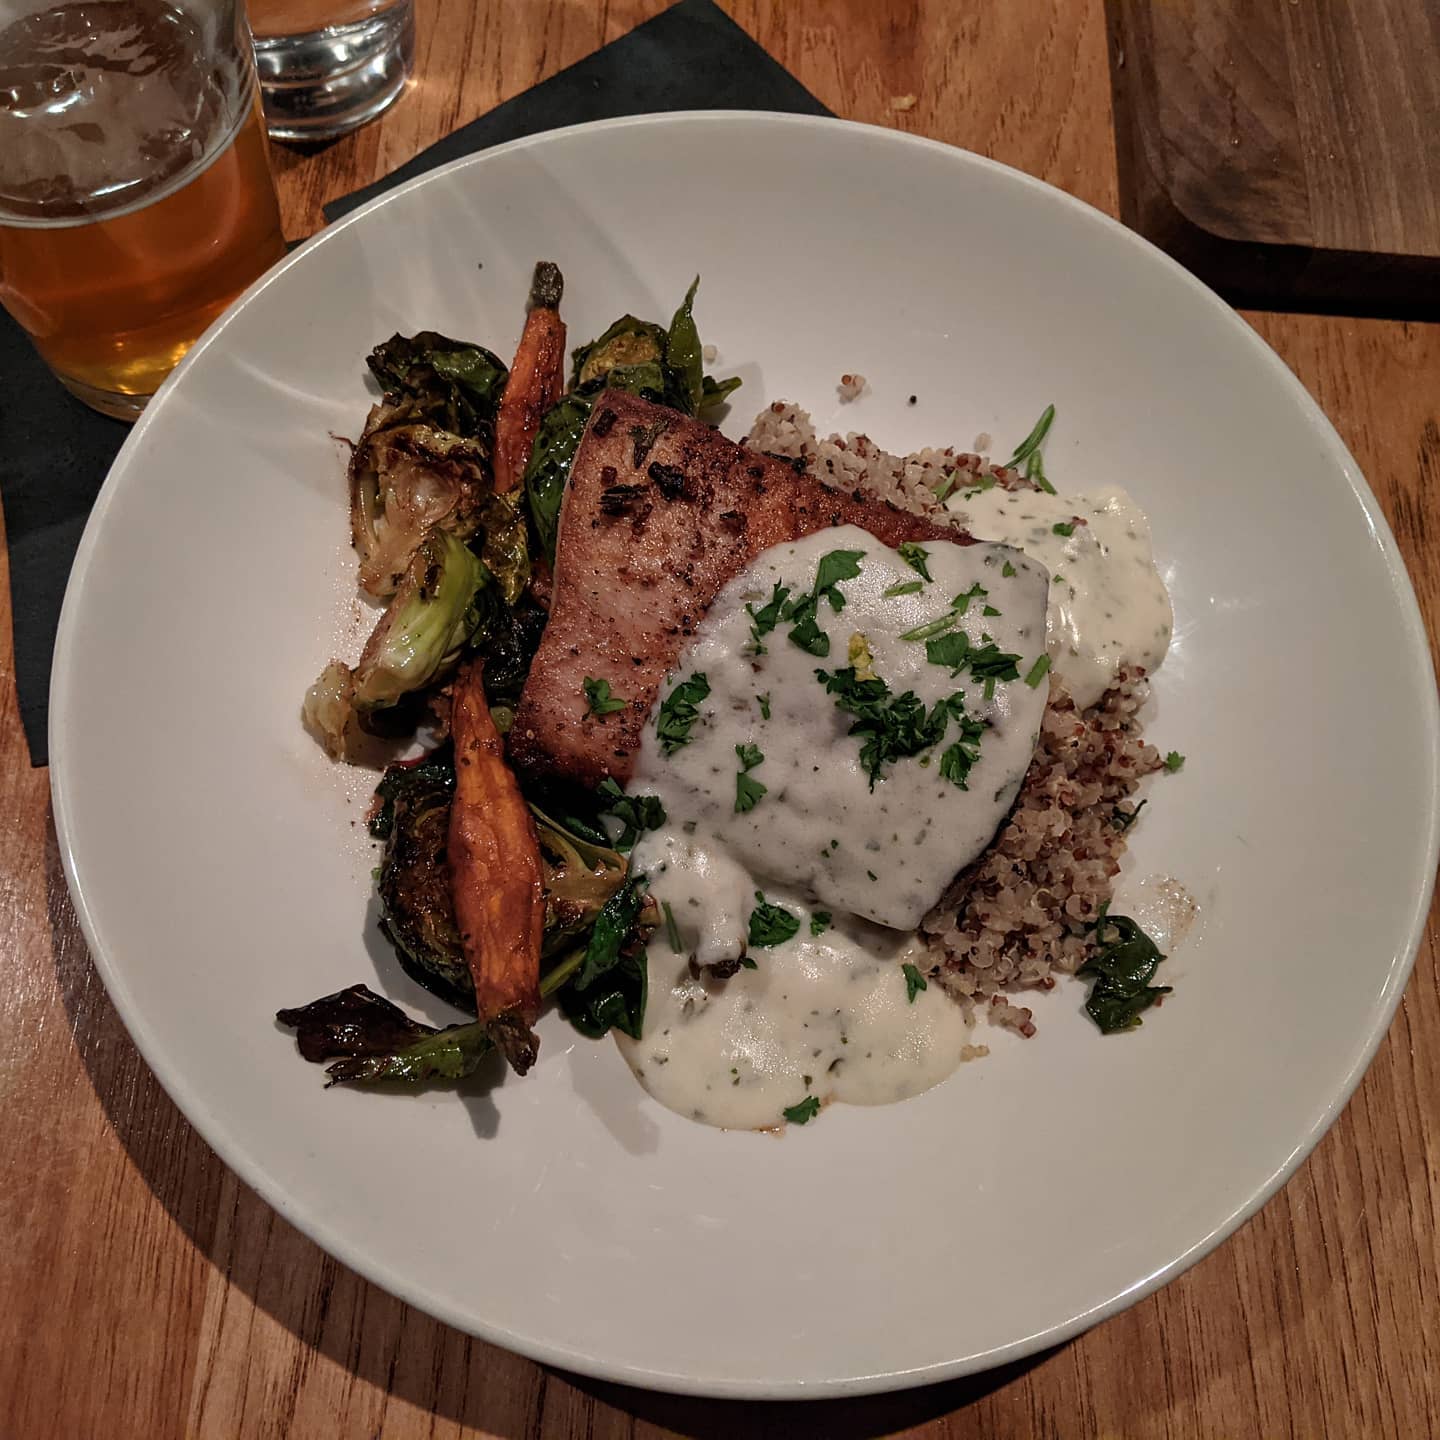 Traveling #foodporn in #tuscaloosa at The River restaurant overlooking the Black Warrior River. Mahi on a herbed Quinoa bed.And a local beer from Black Warrior Brewing as a side 🤣